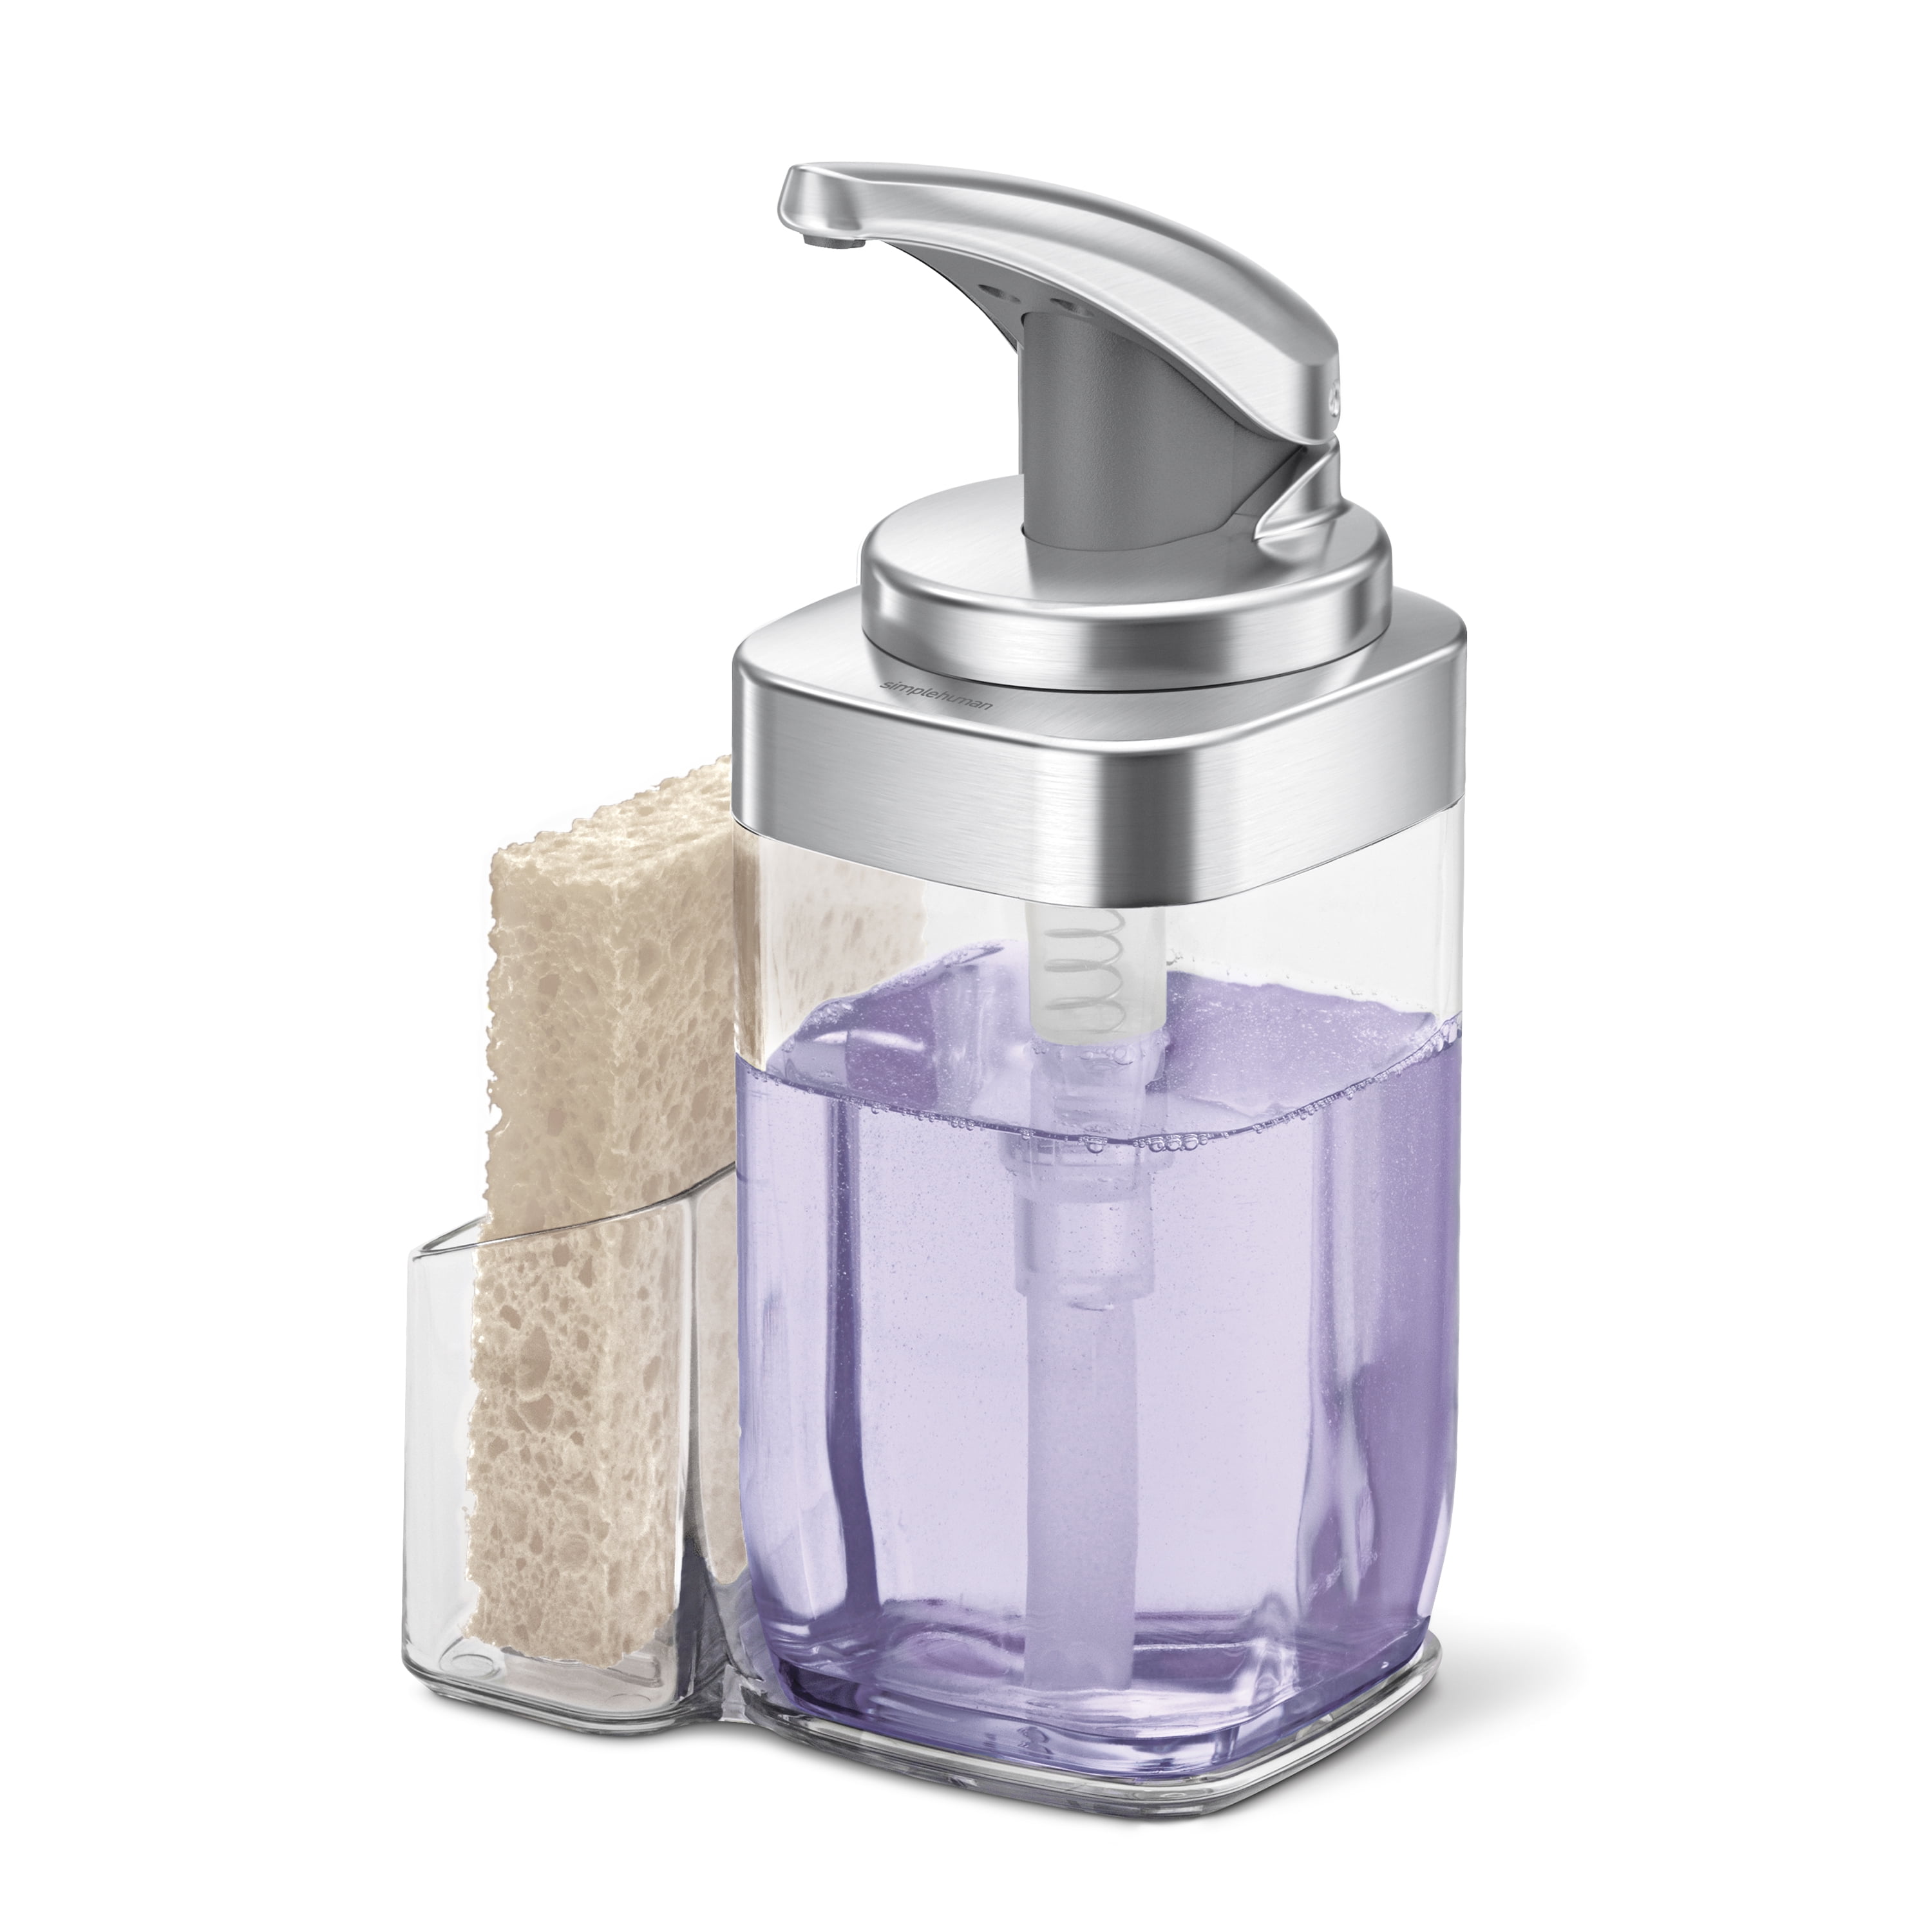 simplehuman Push Soap Pump with Caddy 